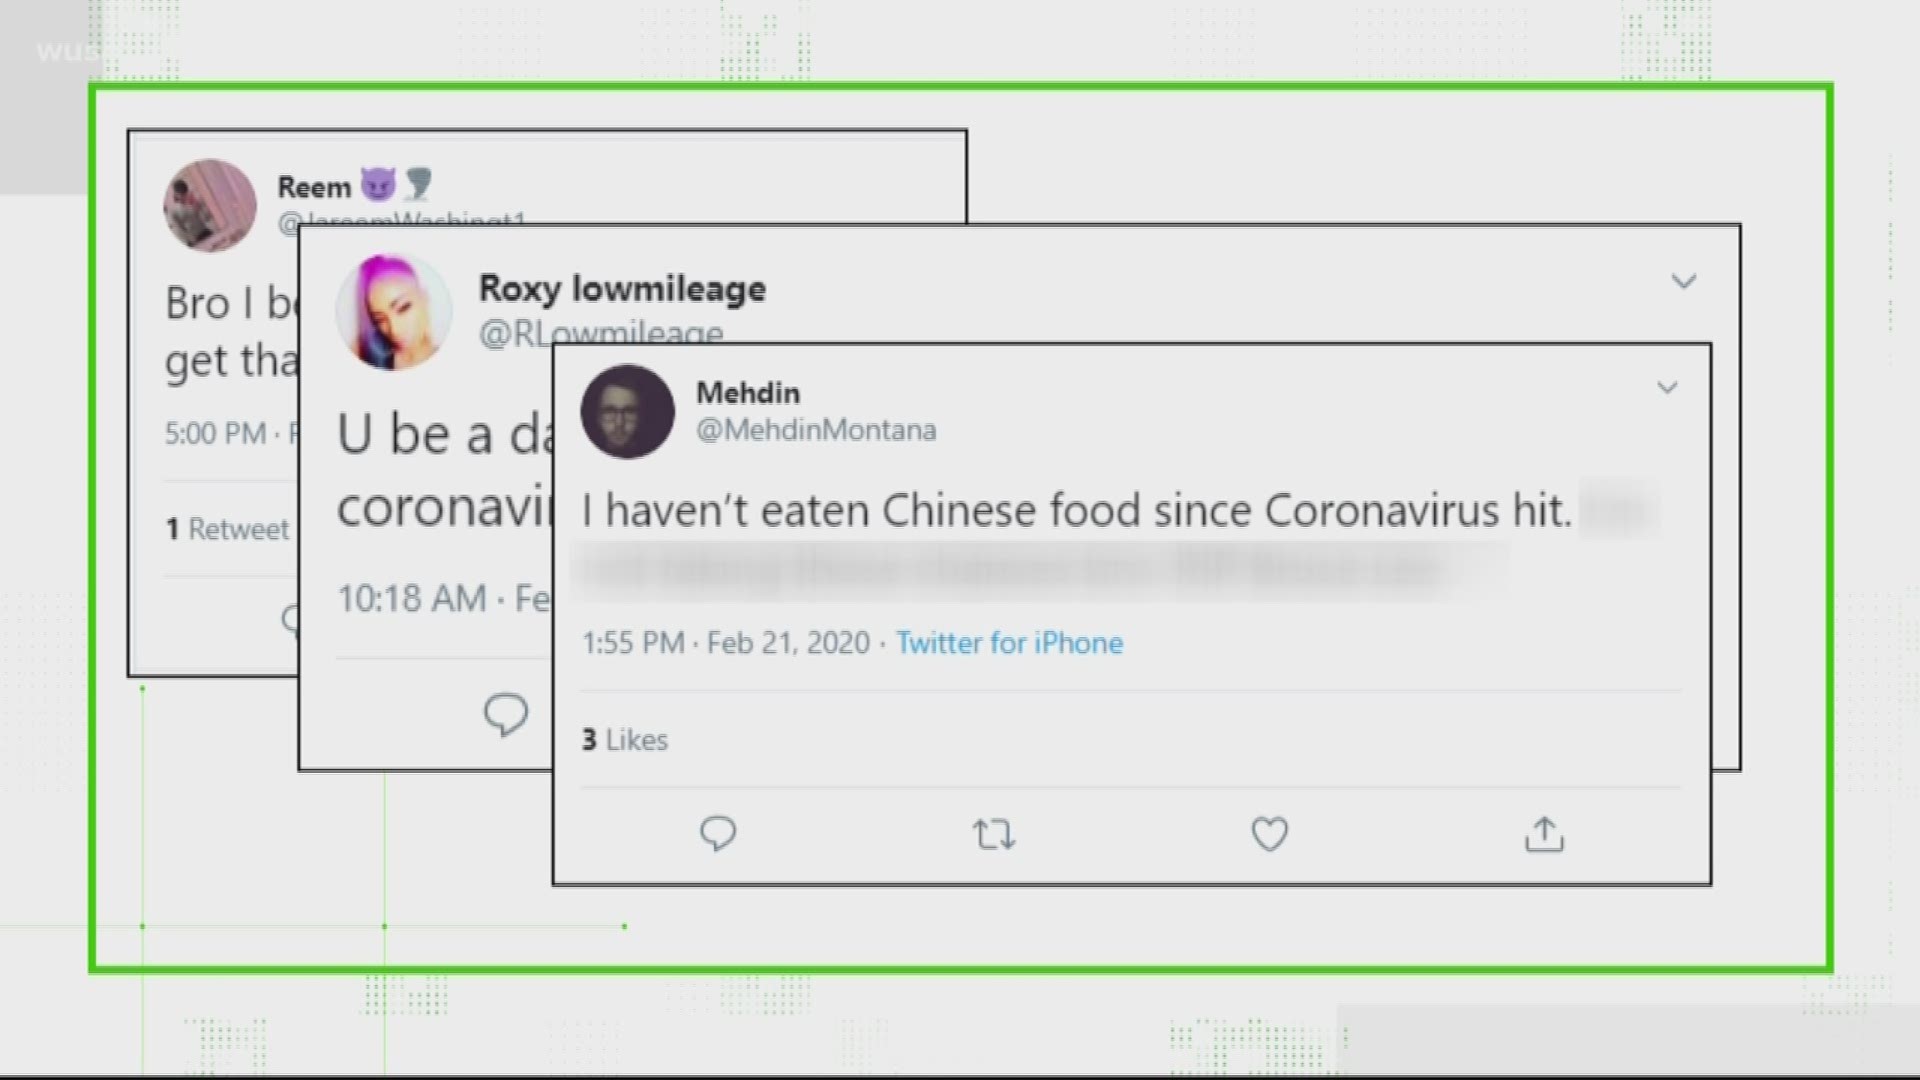 It's a rumor that's been circulating on social media. The only problem is that it's completely wrong. You can't get the virus by eating Chinese food.